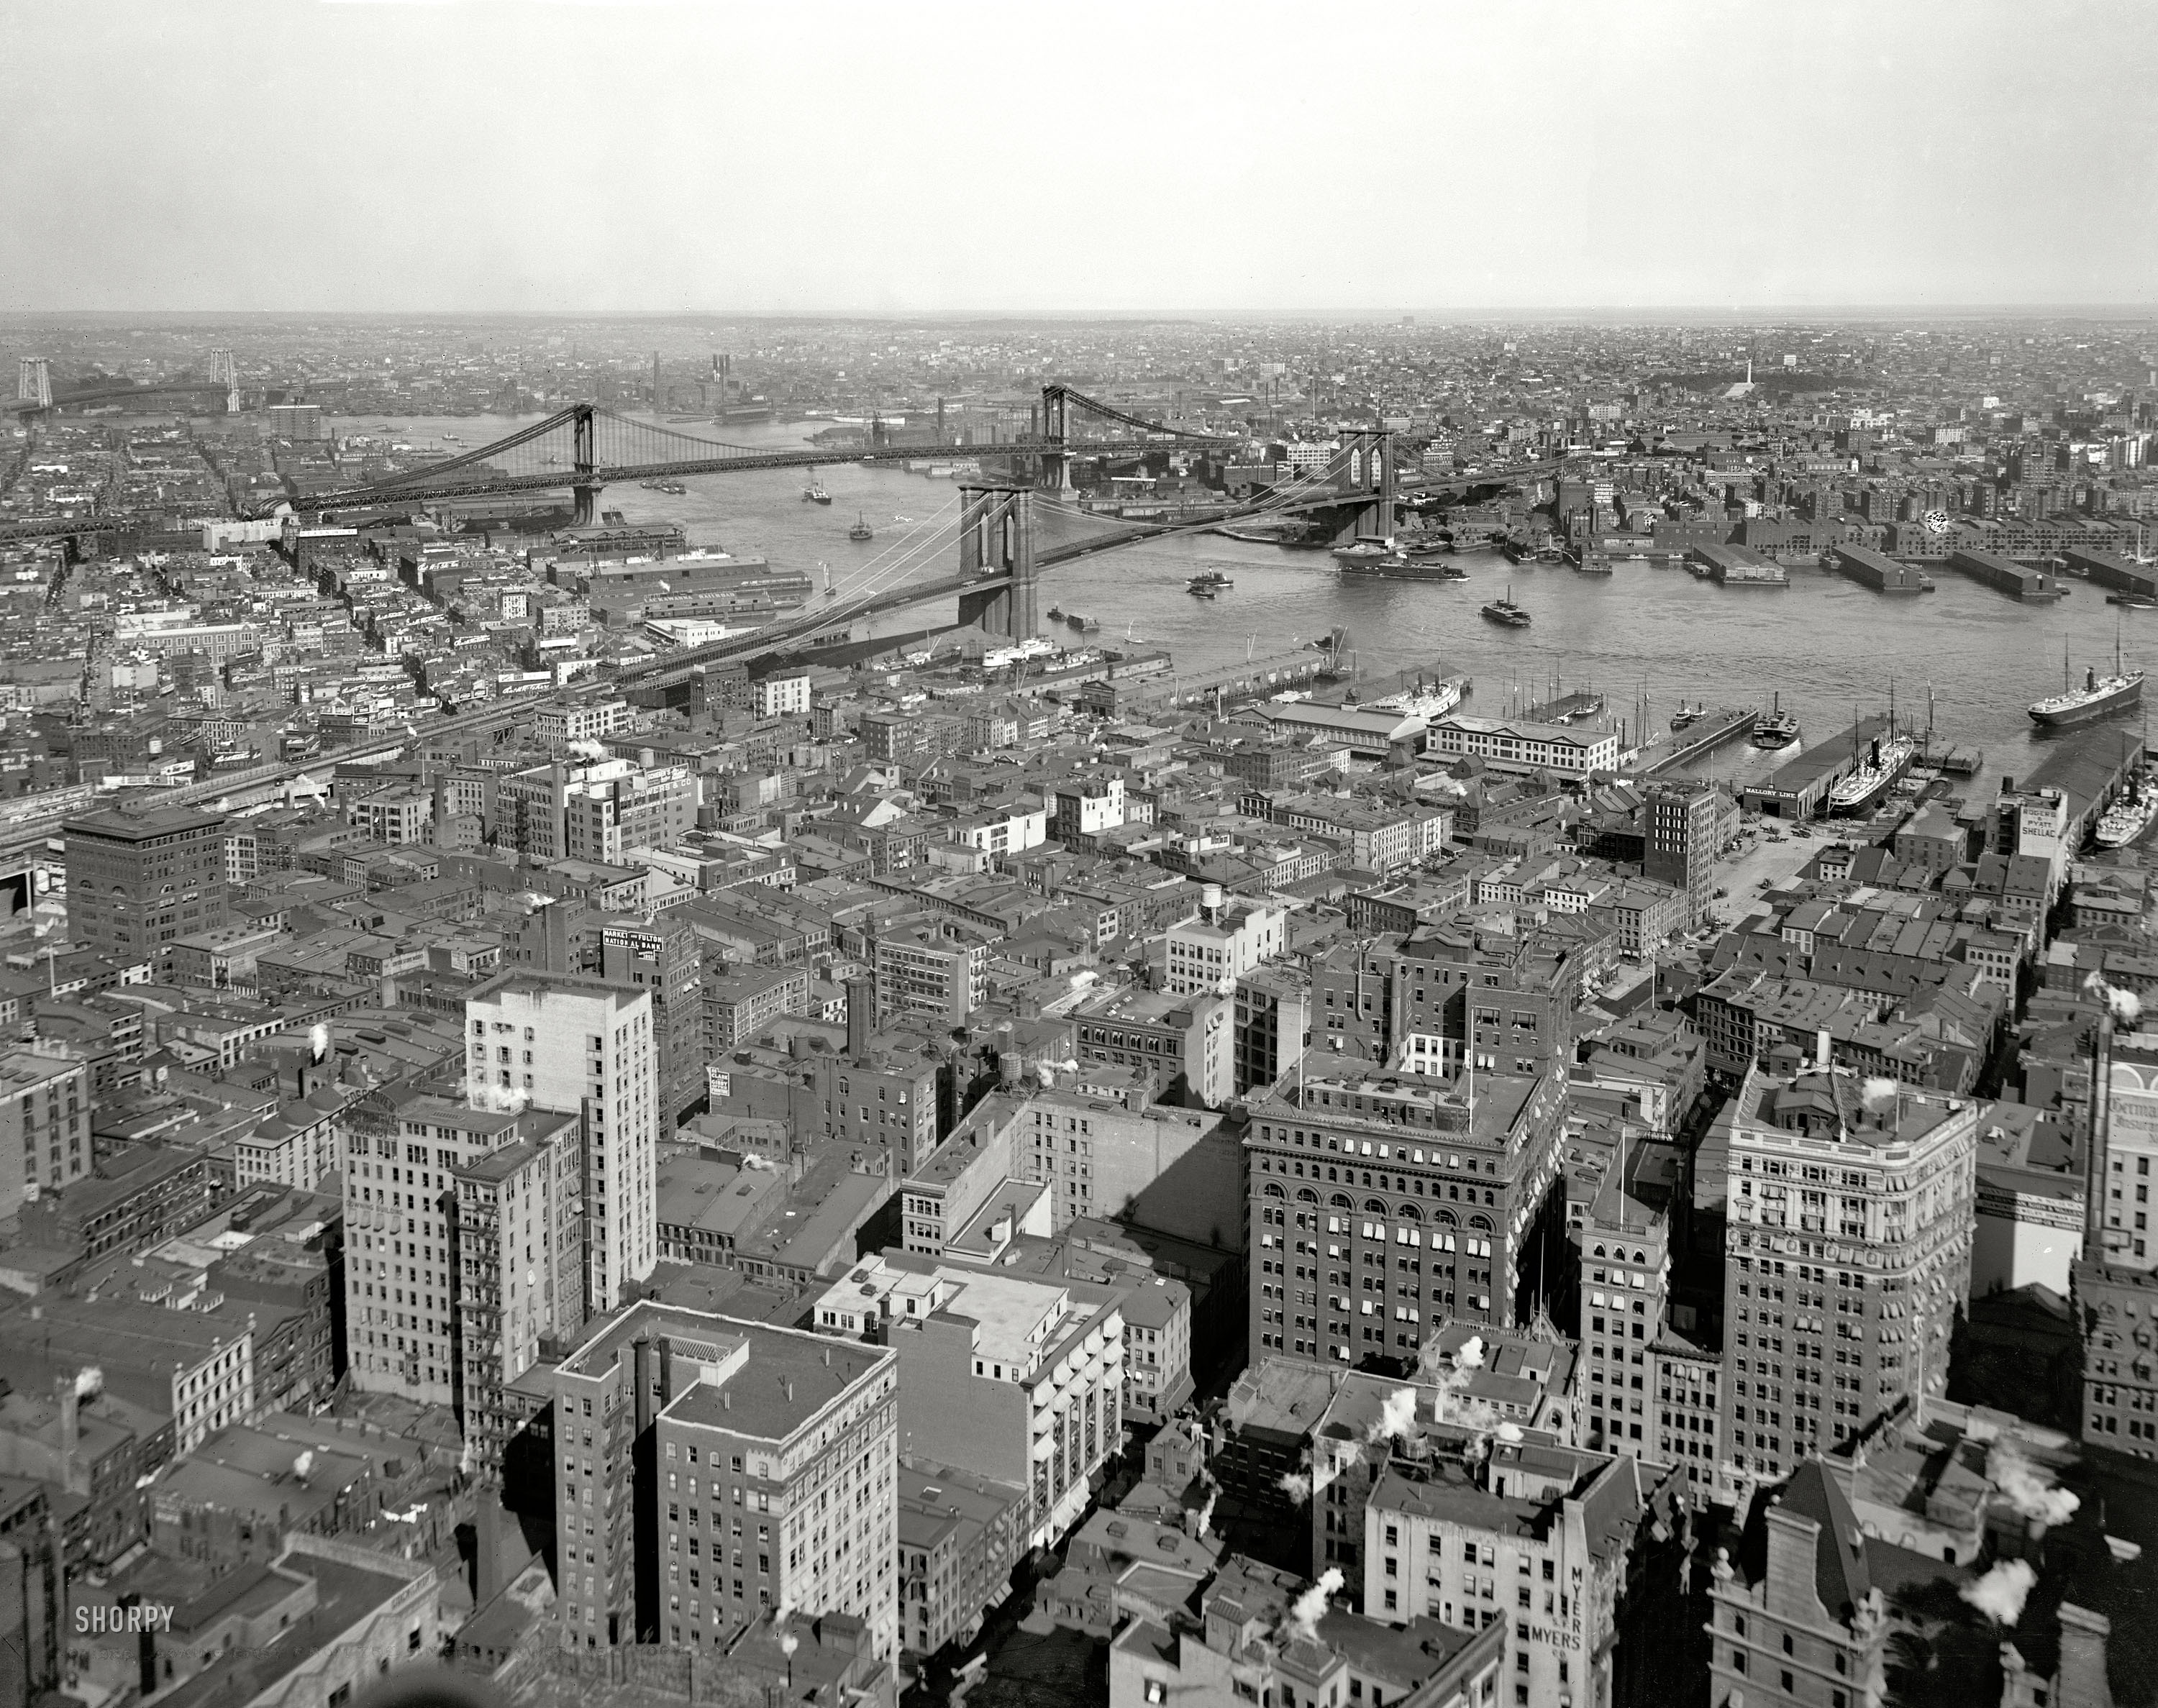 New York and the East River circa 1910. "Looking east from the Singer Tower." 8x10 inch dry plate glass negative, Detroit Publishing Company. View full size.